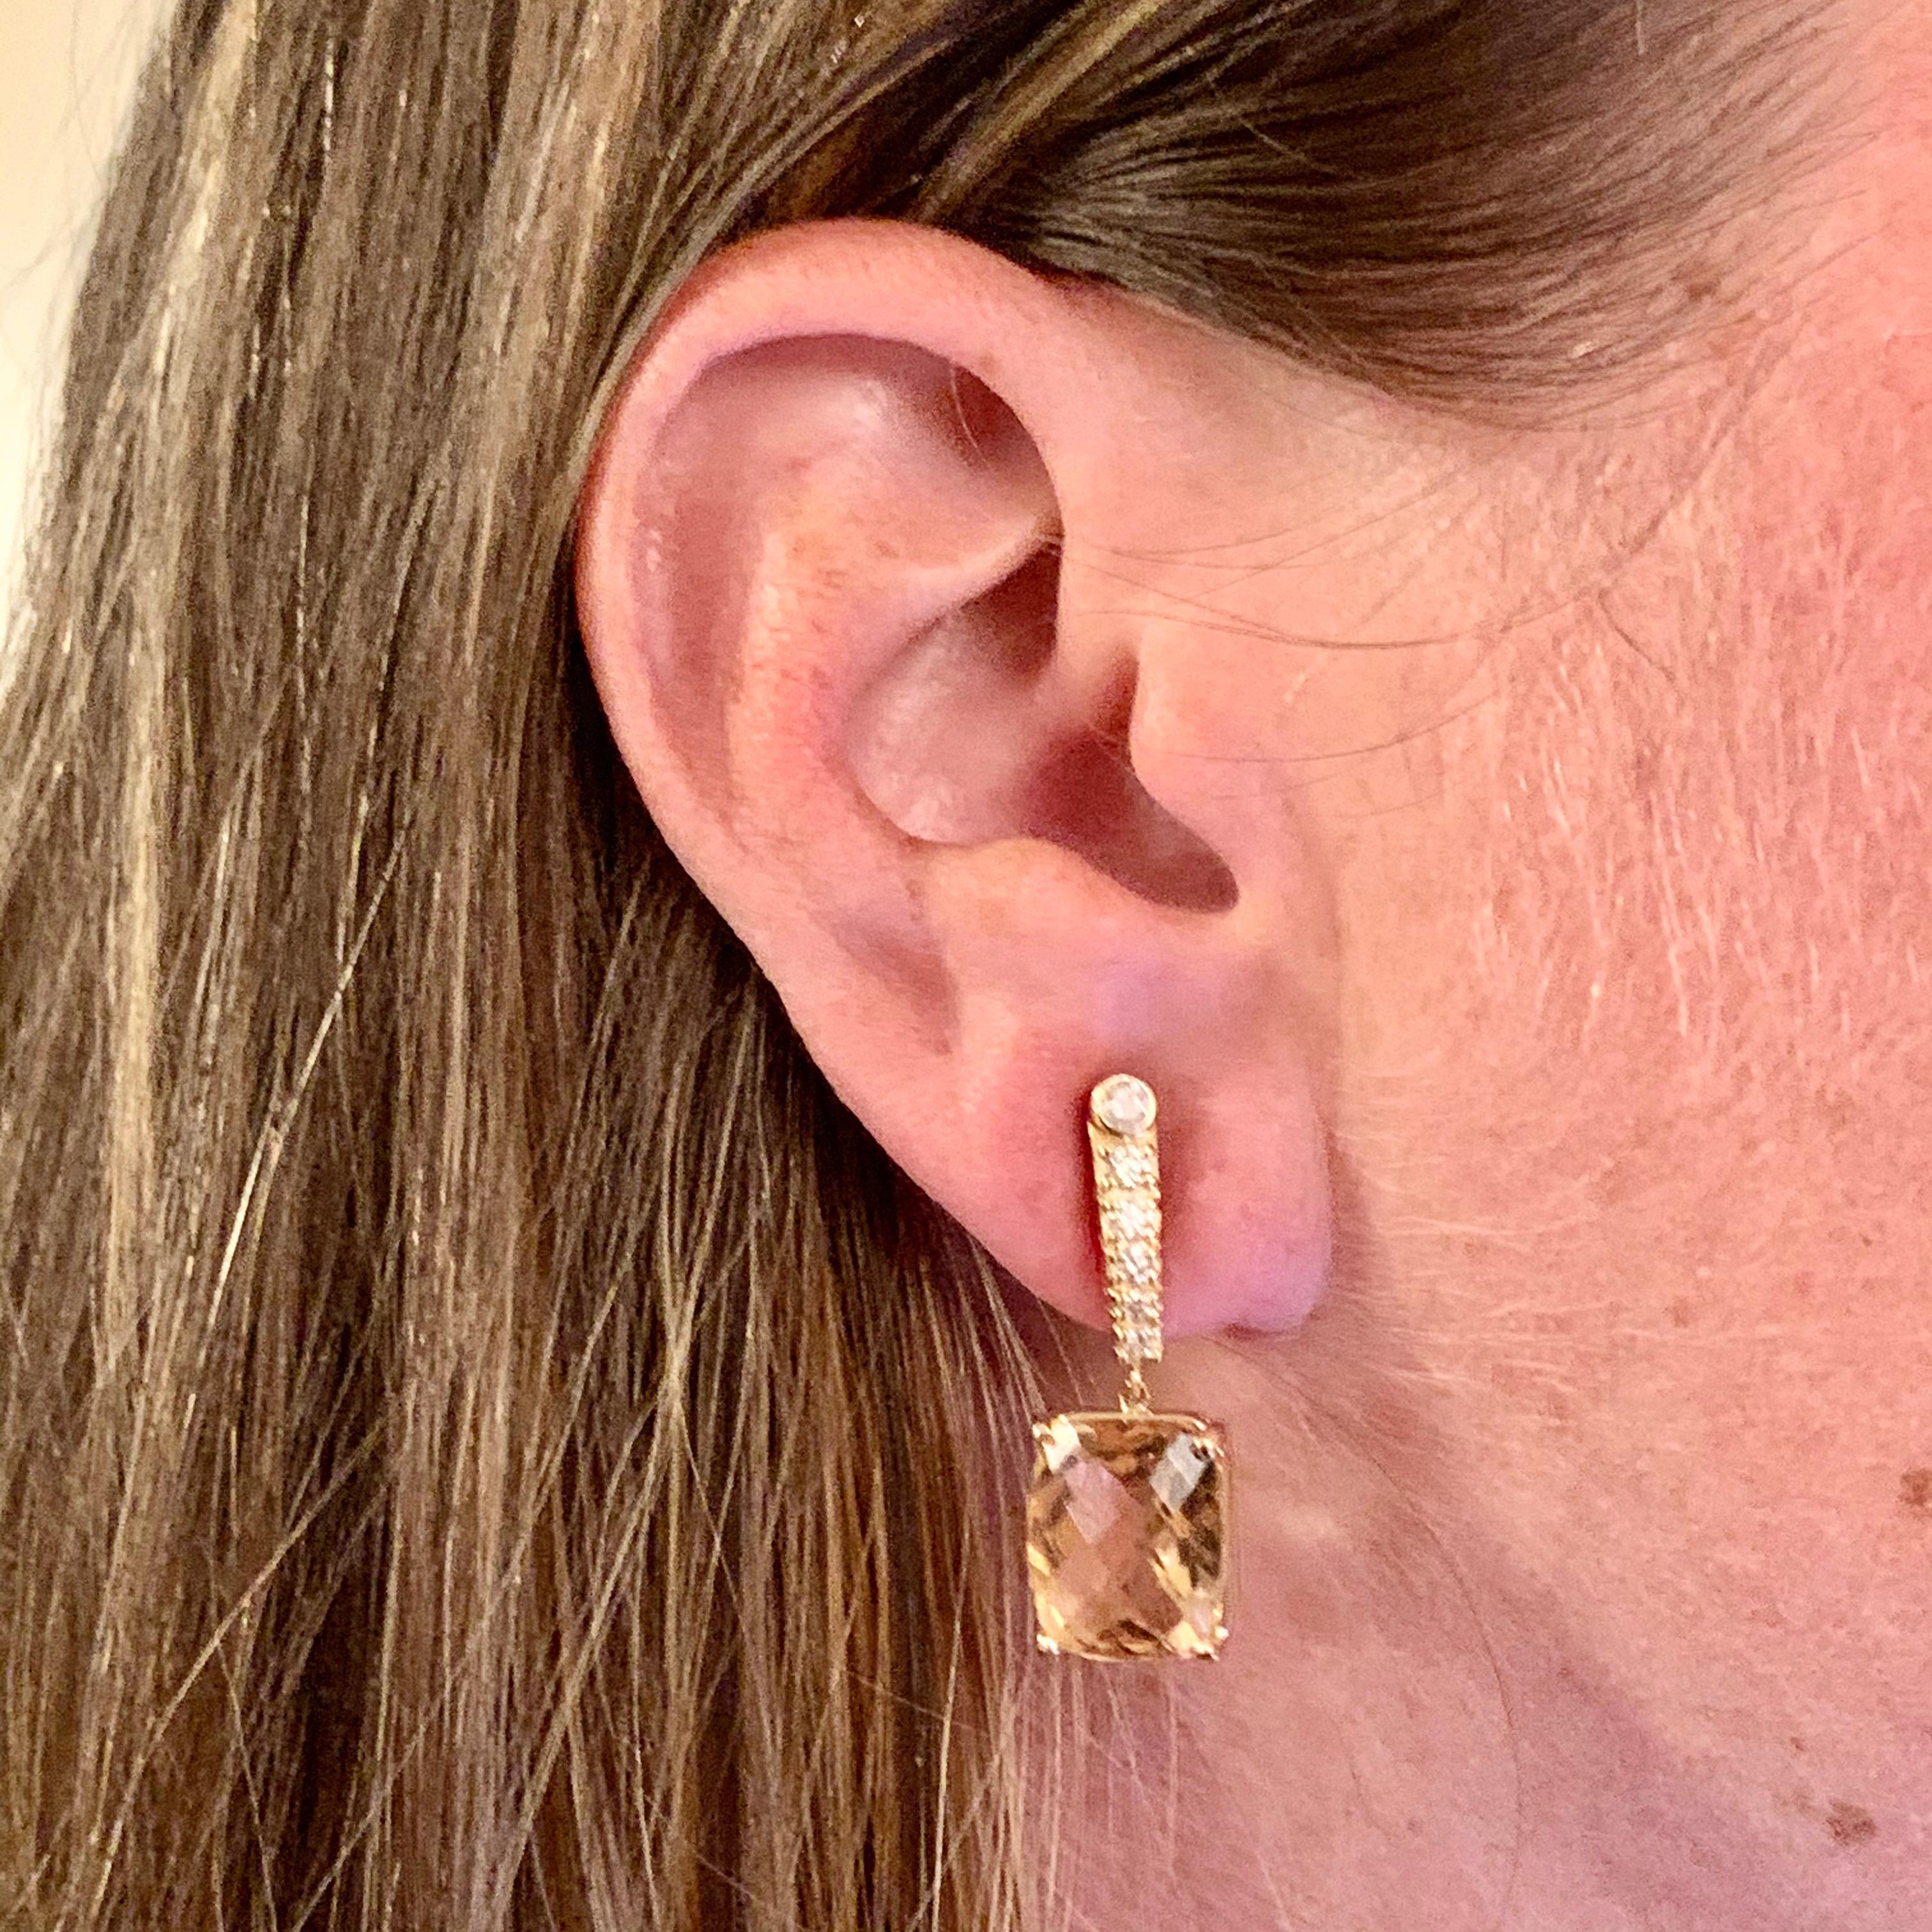 Natural Finely Faceted Quality Morganite Diamond Earrings 14k Gold 9.93 TCW Certified $5,950 018685

This is a Unique Custom Made Glamorous Piece of Jewelry!

Nothing says, “I Love you” more than Diamonds and Pearls!

This pair of Morganite earrings